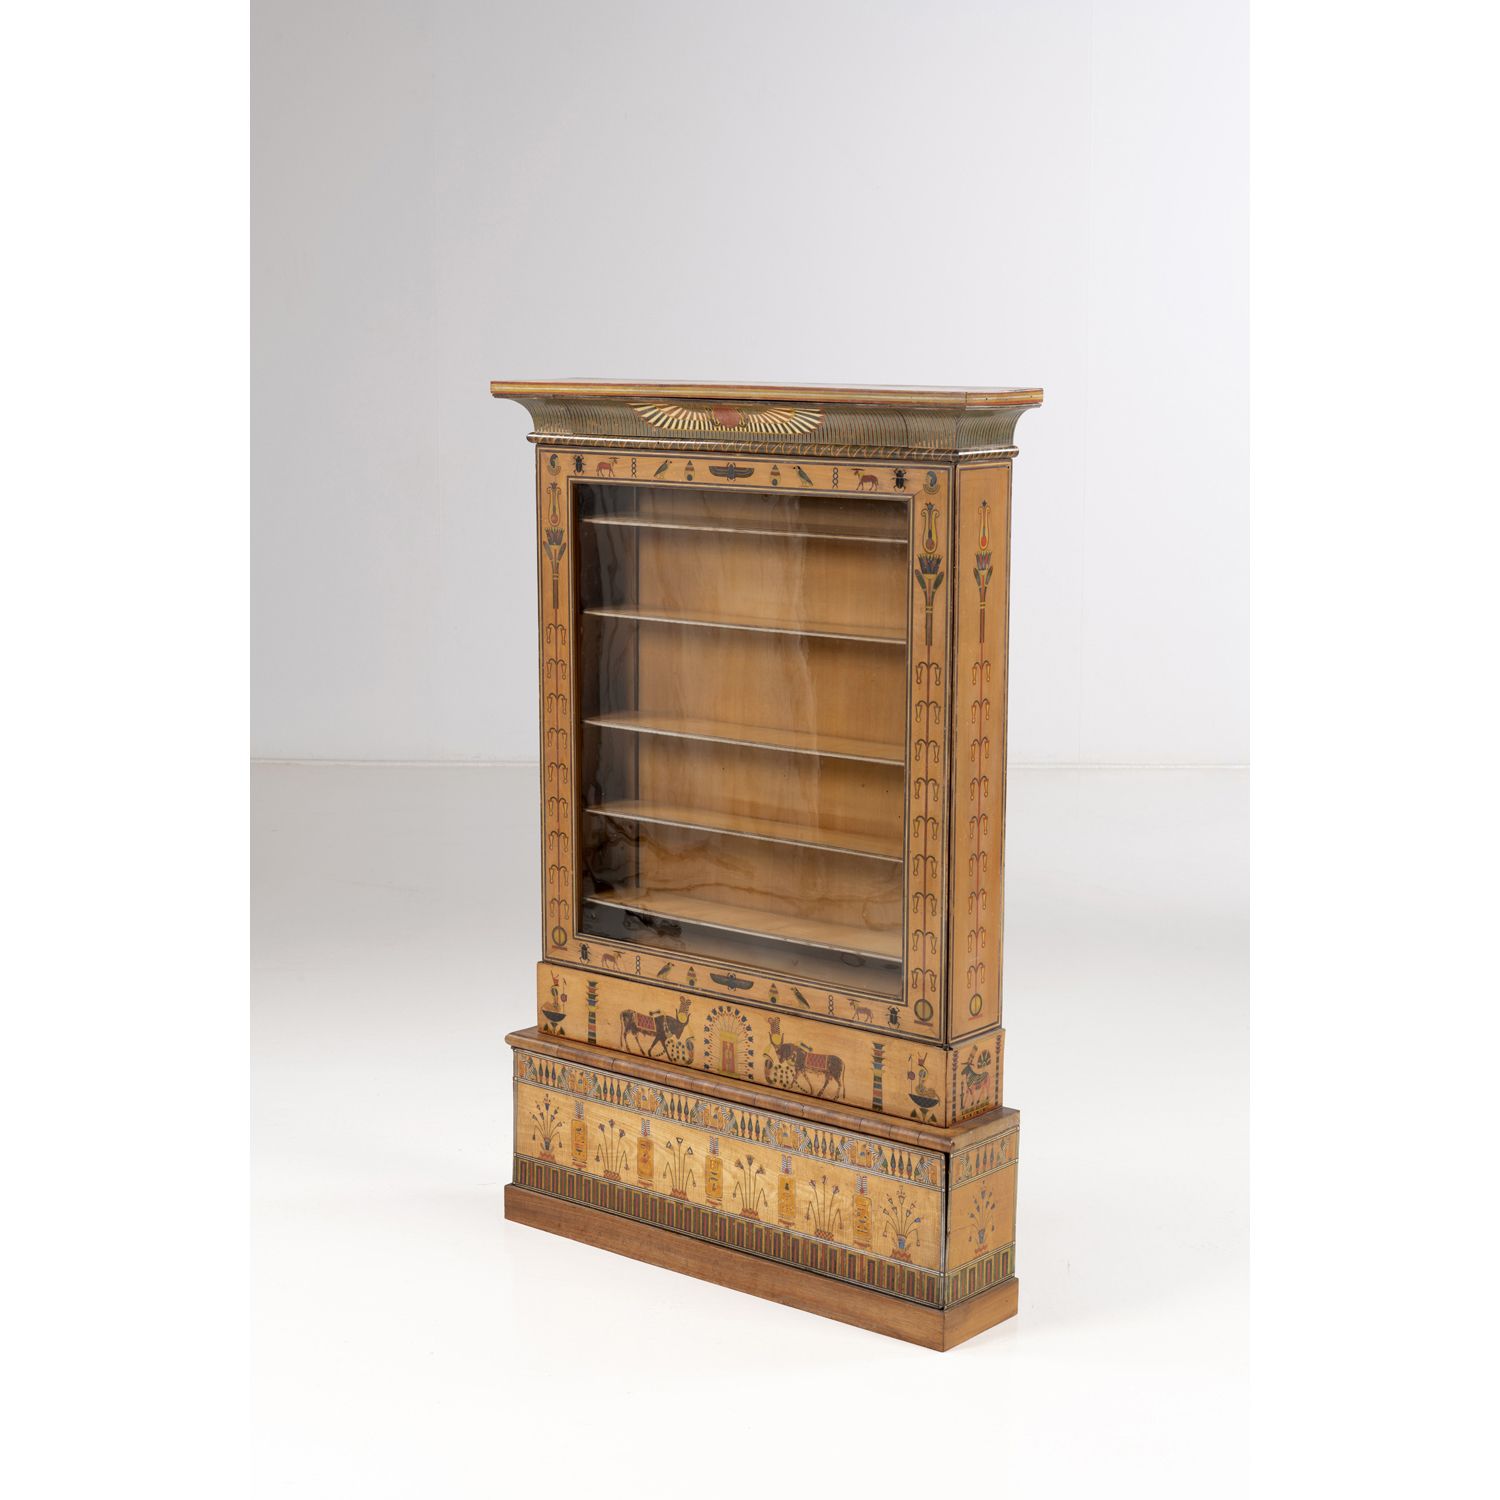 Null 
Giuseppe Parvis (1832-1905), attributed to





Display case with a door a&hellip;